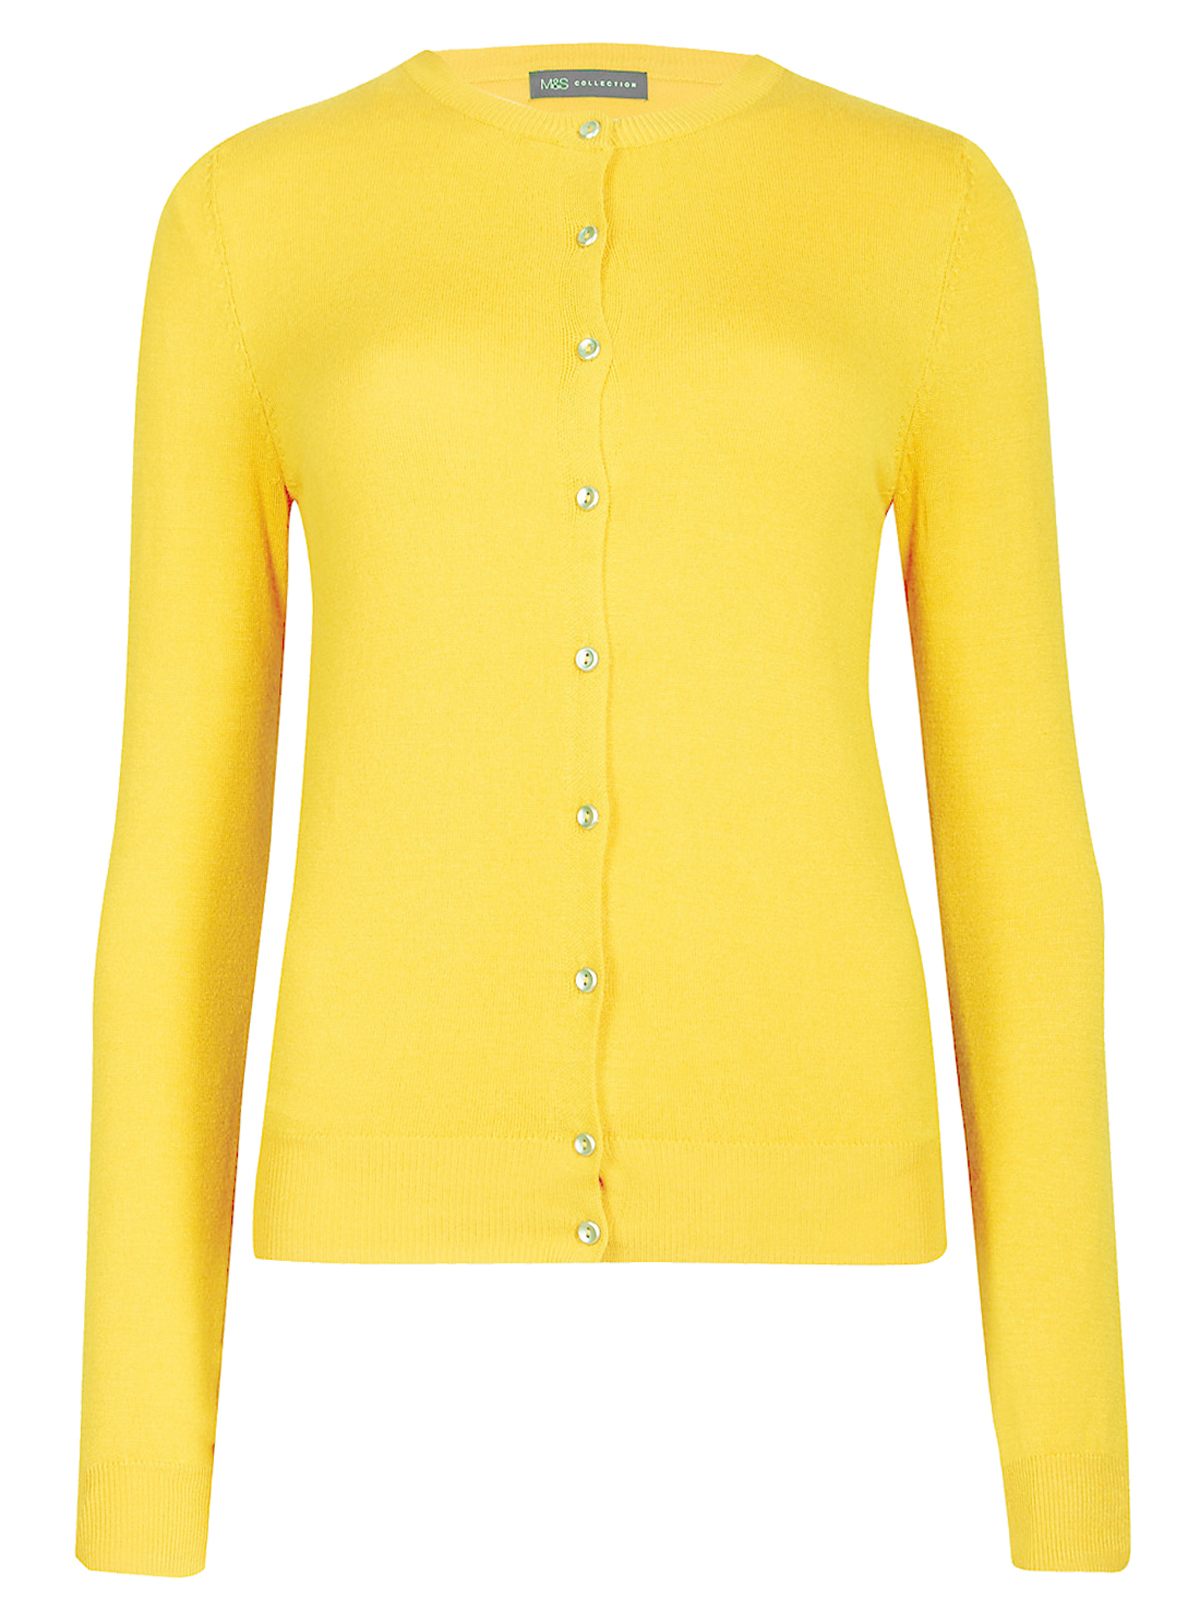 Marks and Spencer - - M&5 ASSORTED Ribbed Round Neck Button Through ...